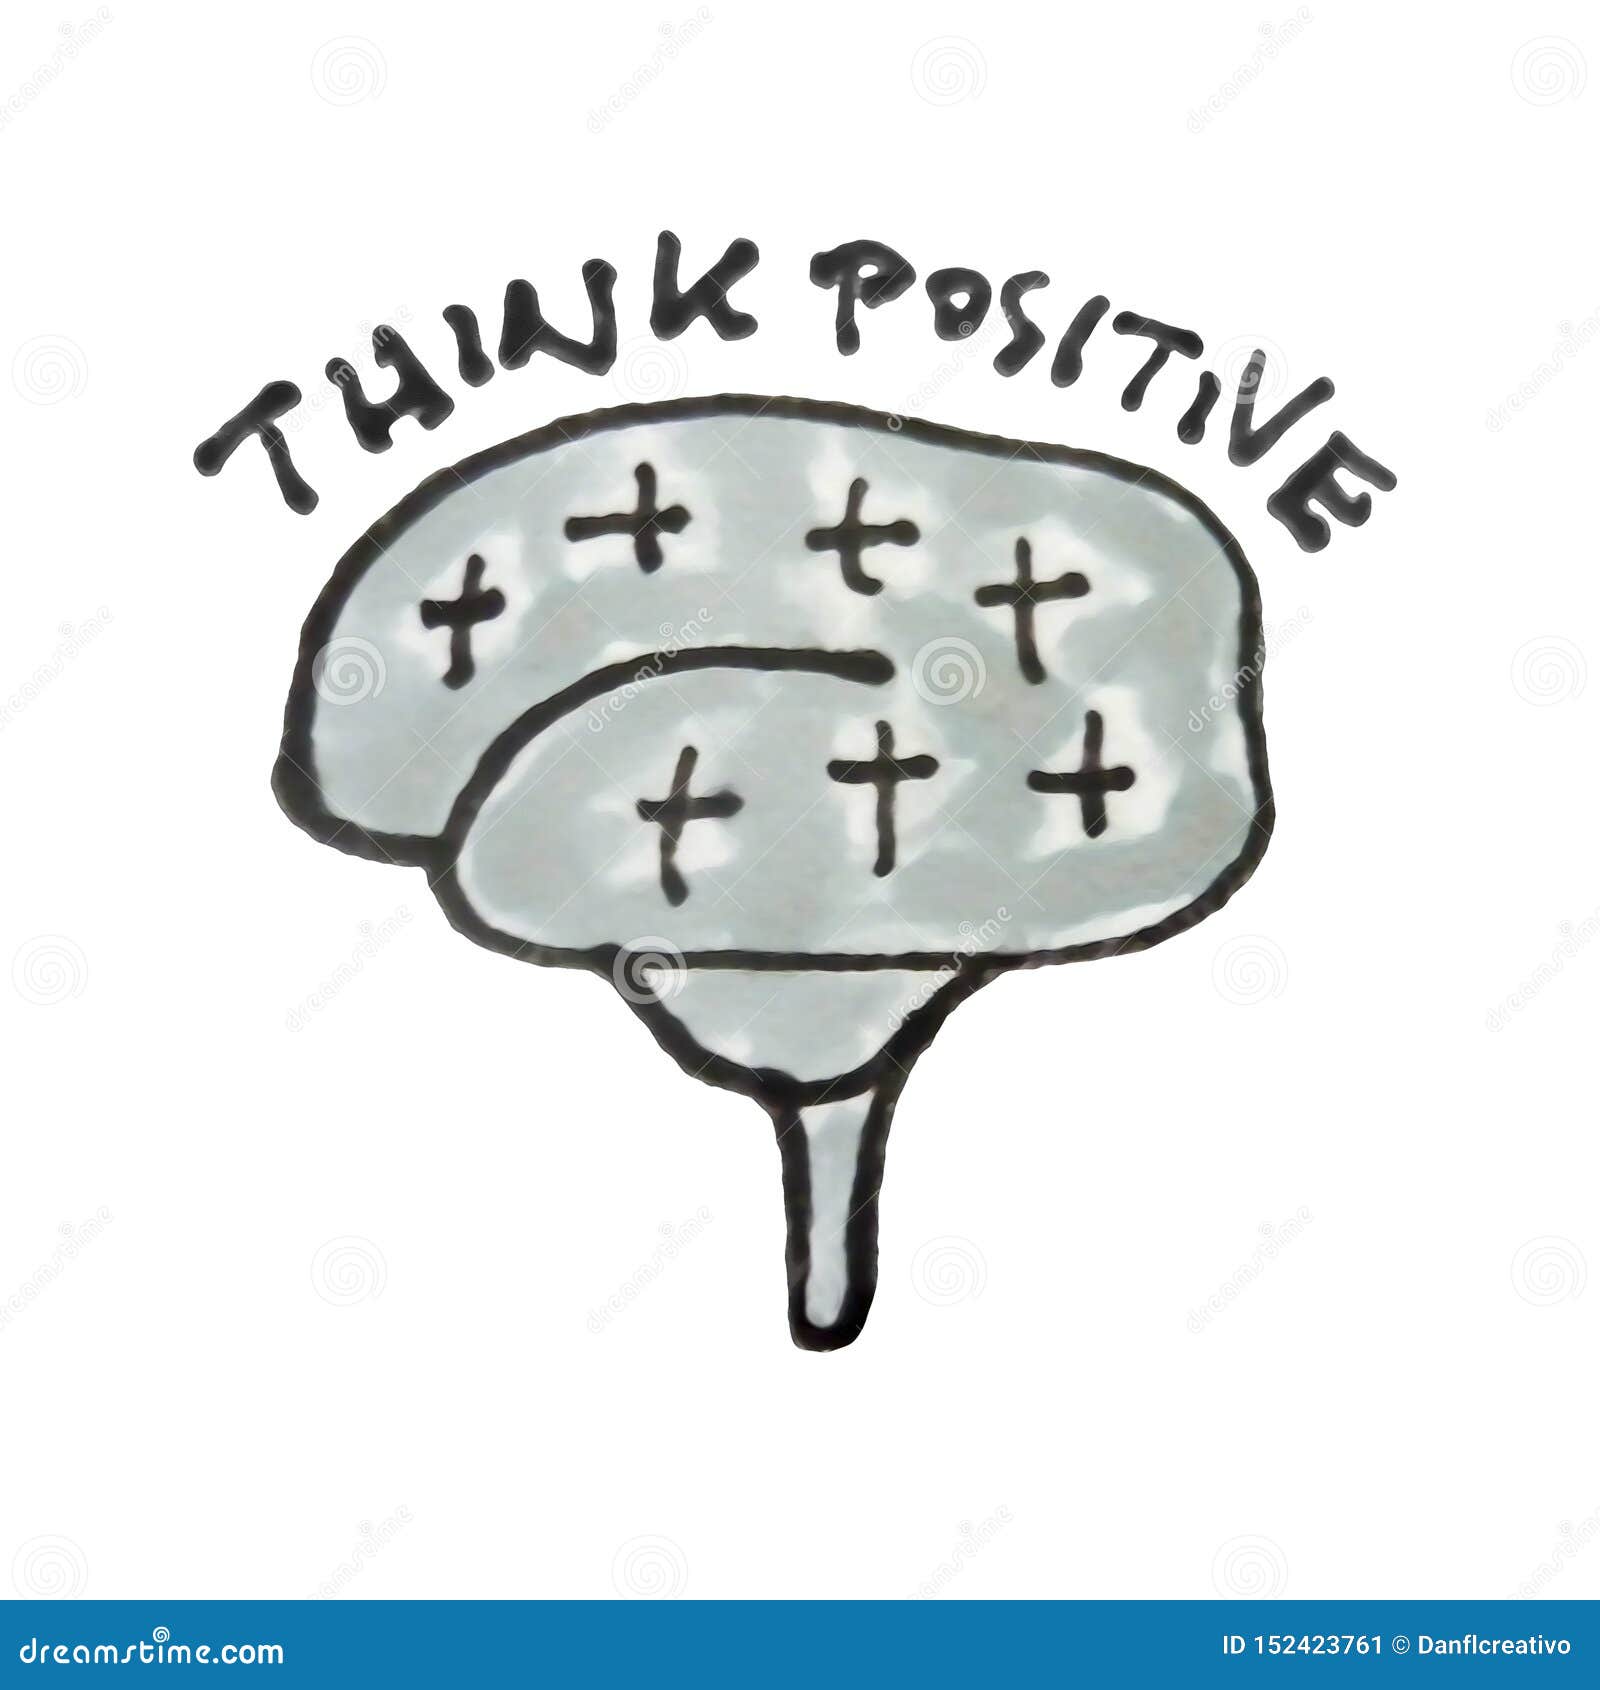 Positive Thinking Concept Drawing Stock Illustration - Illustration of